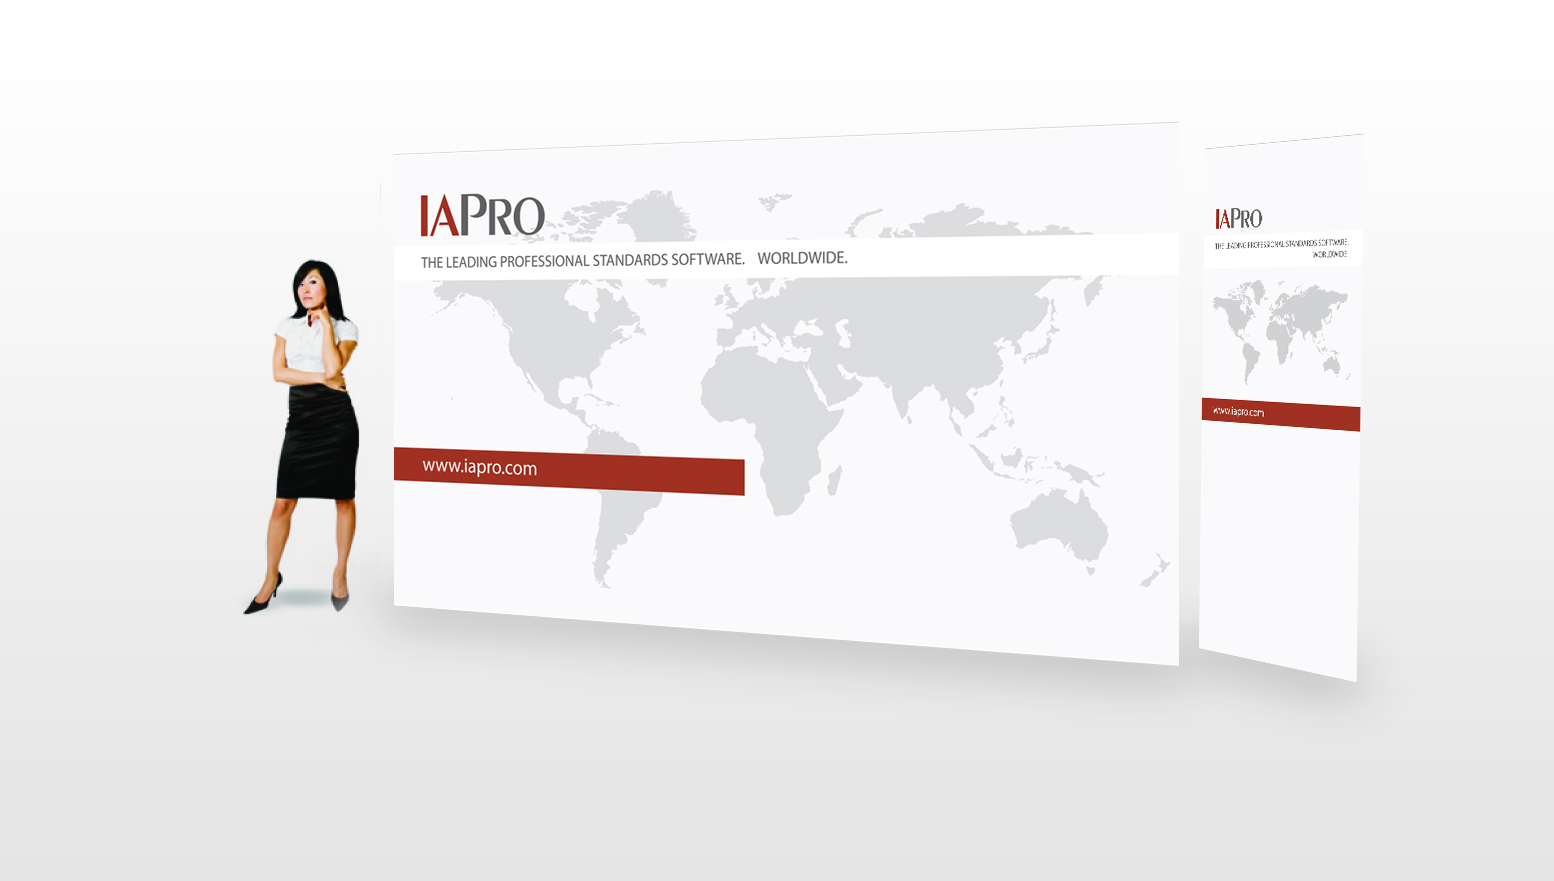 IAPro - Leading Internal Affairs and Professional Standards Software